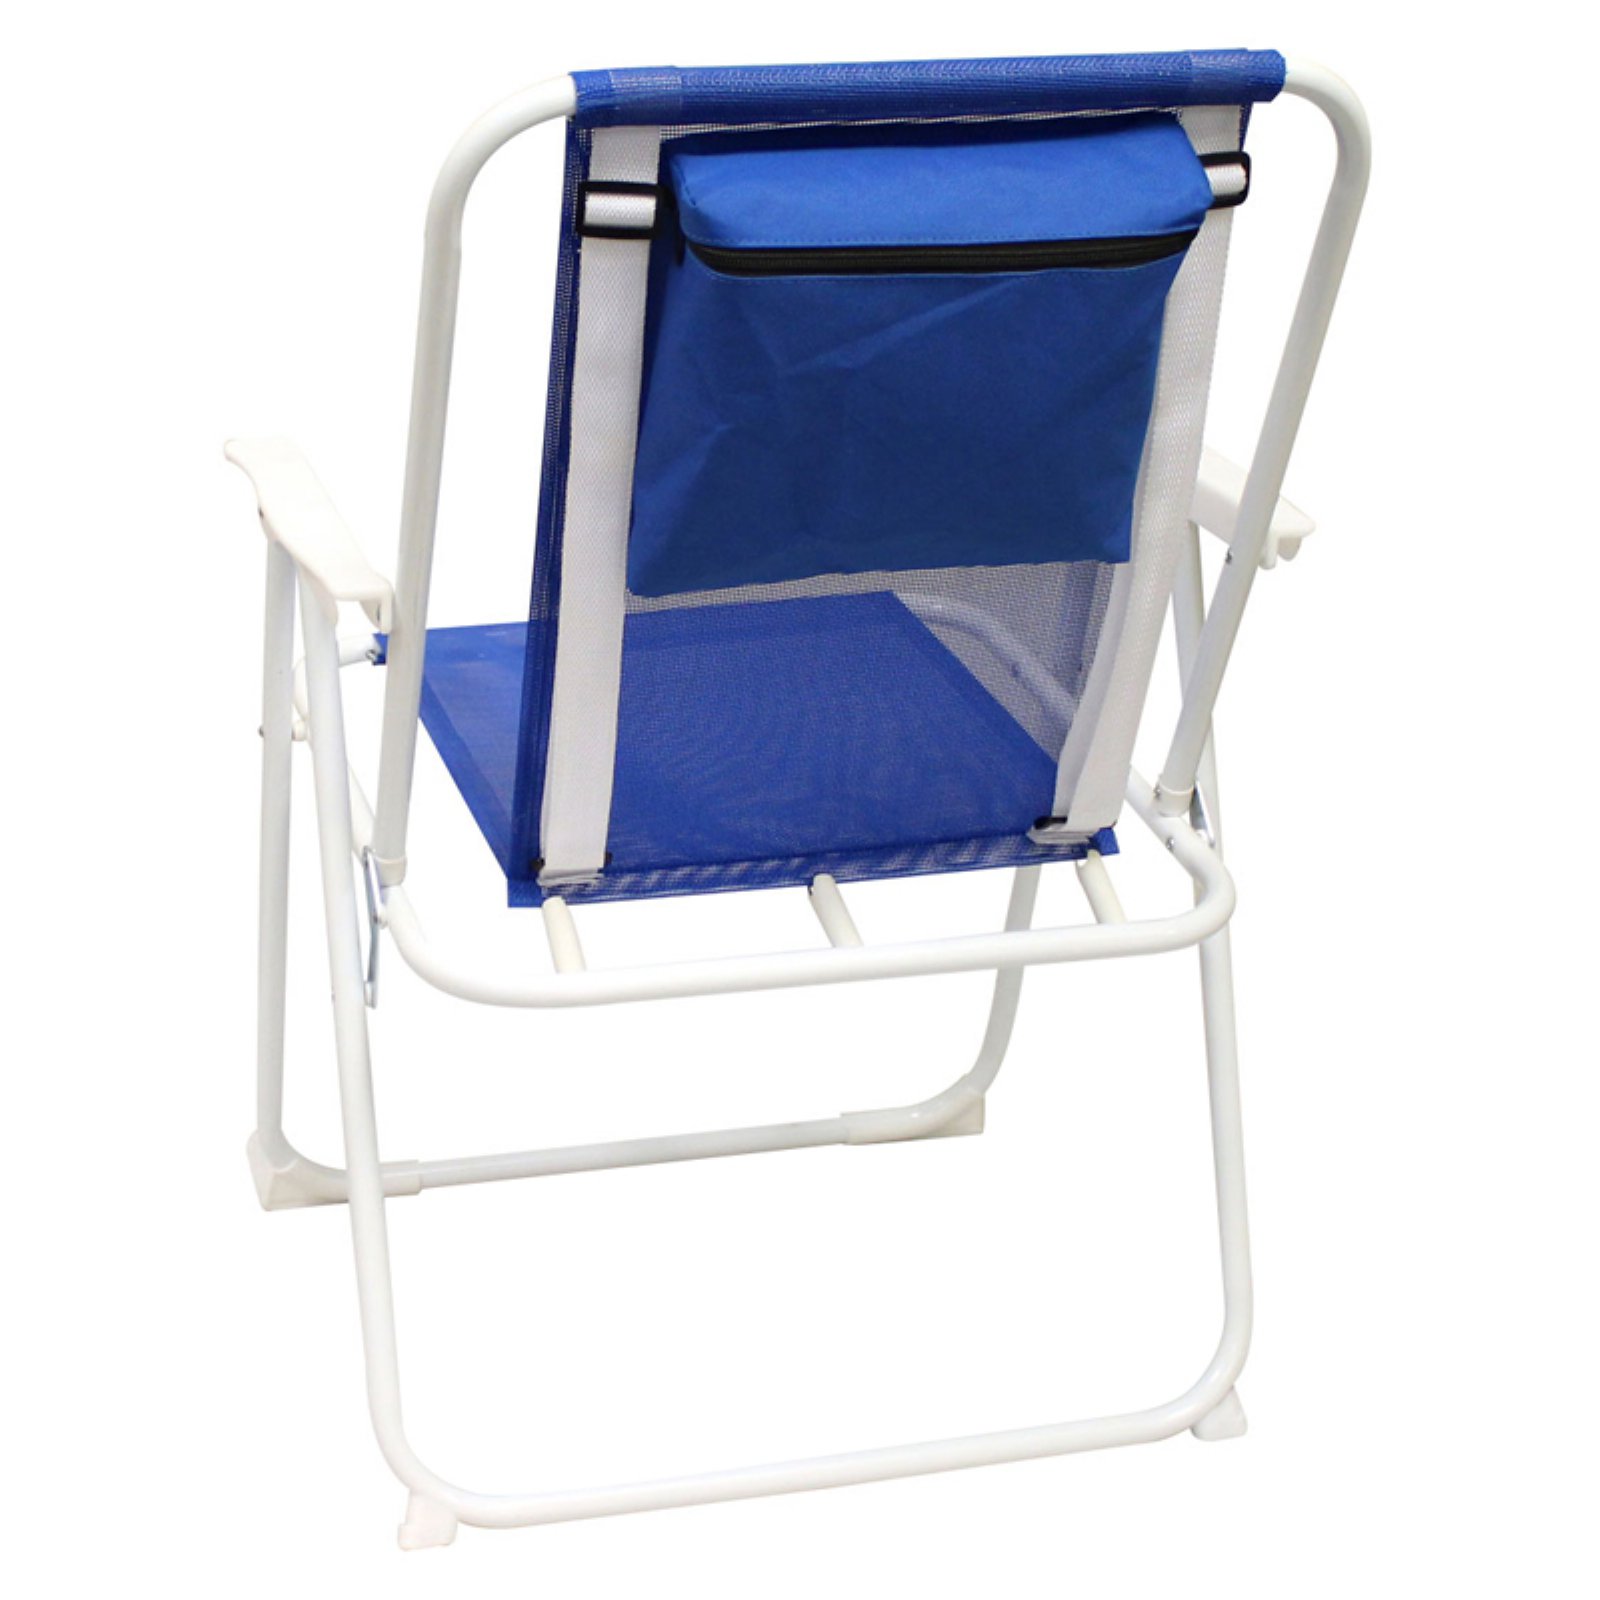 Preferred Nation Portable Beach Chair - image 3 of 3